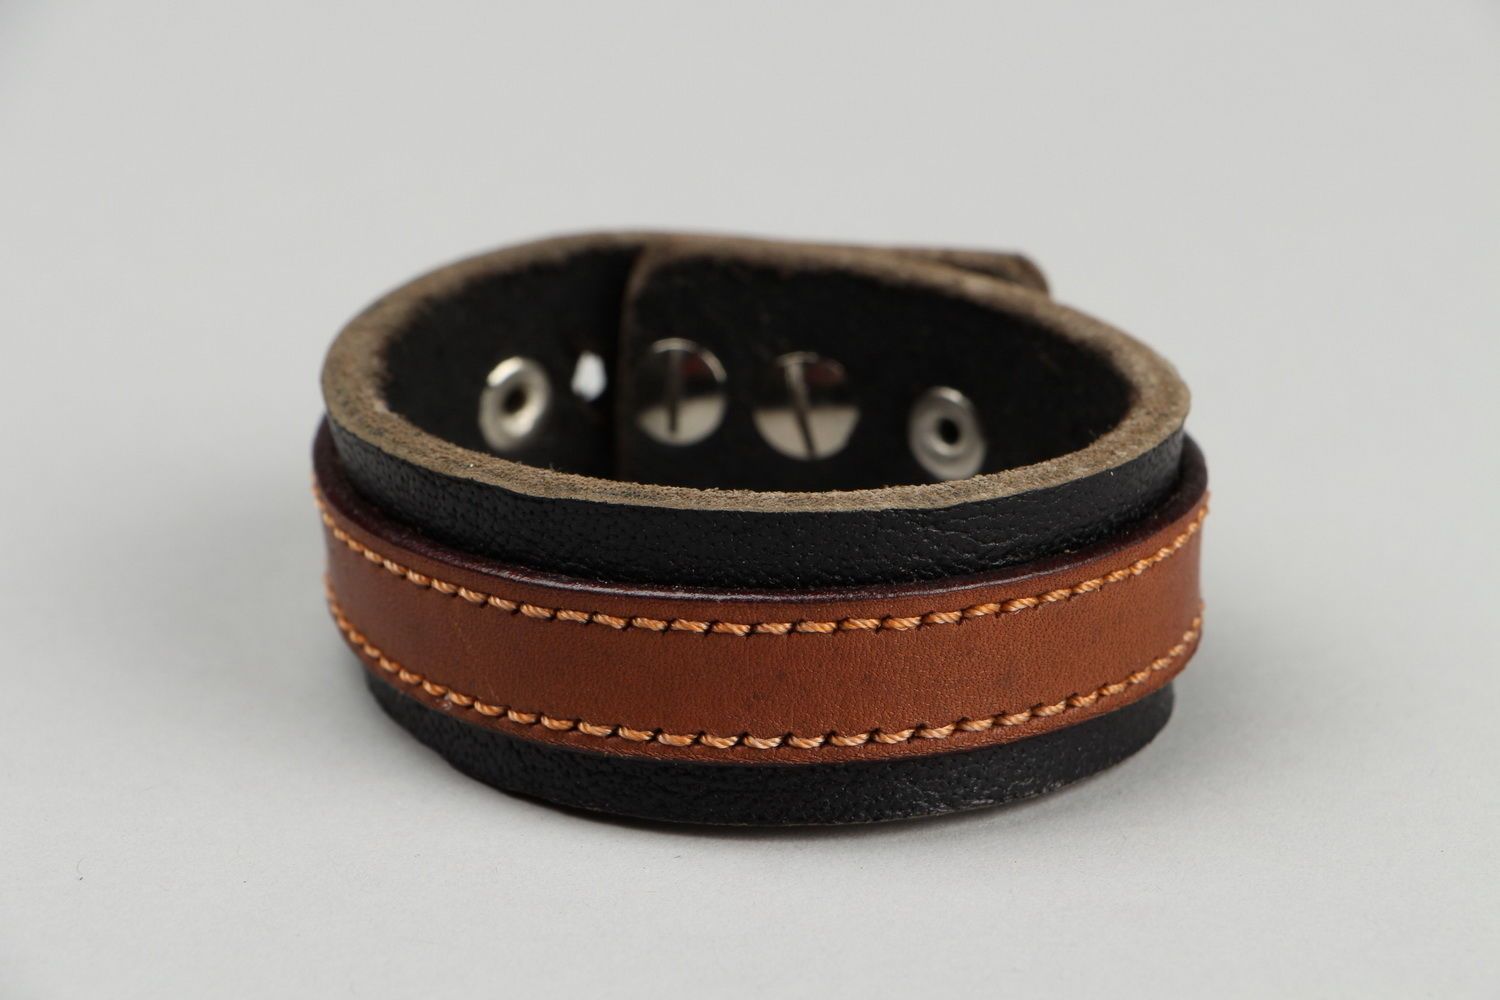 Bracelet of the two types of leather photo 3